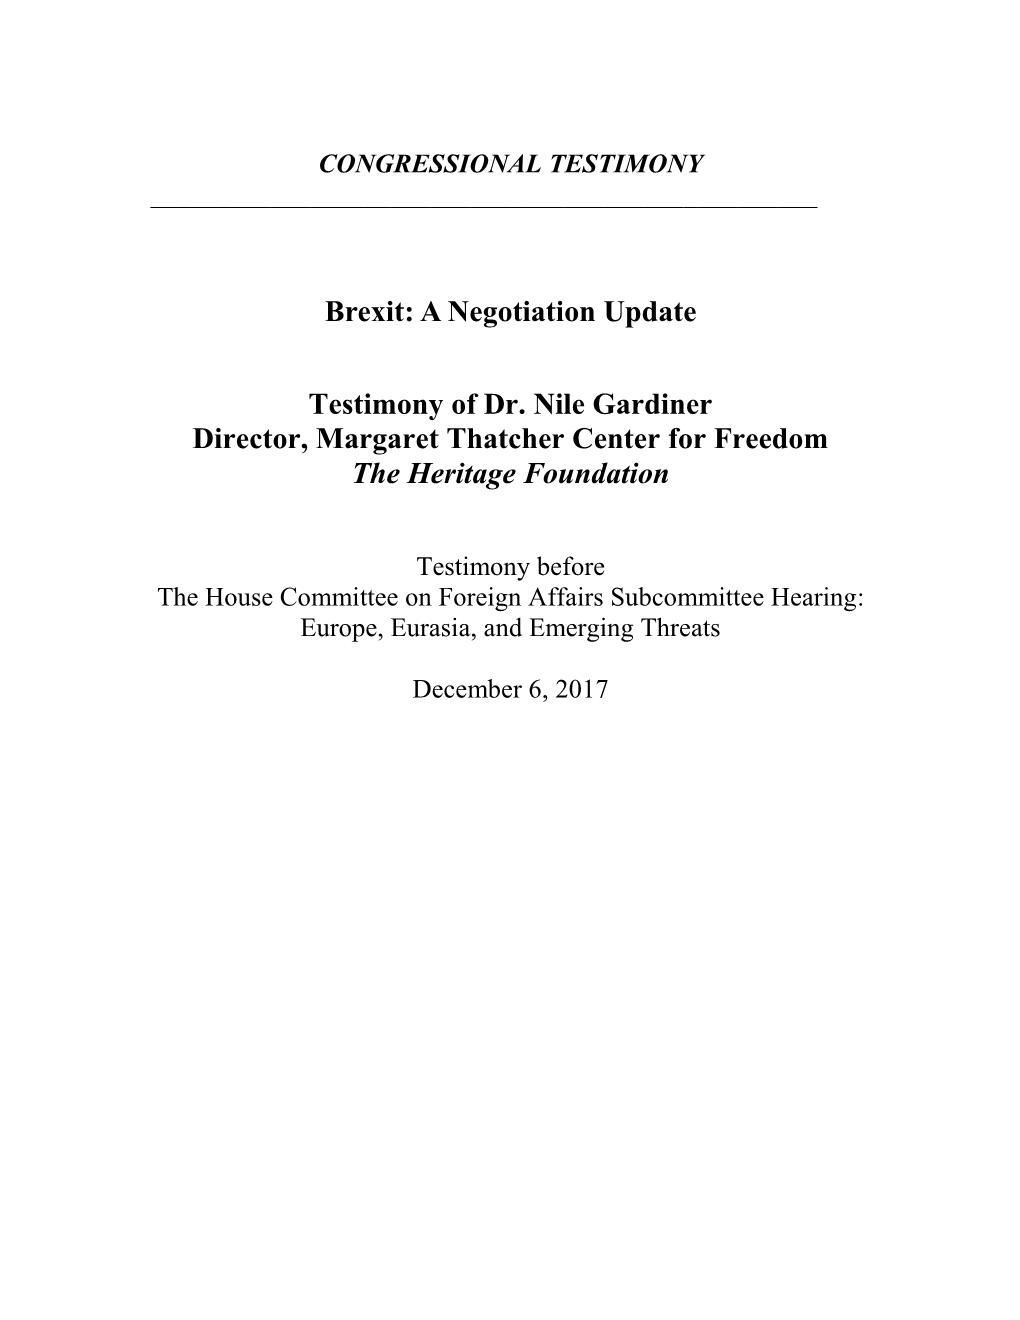 Brexit: a Negotiation Update Testimony of Dr. Nile Gardiner